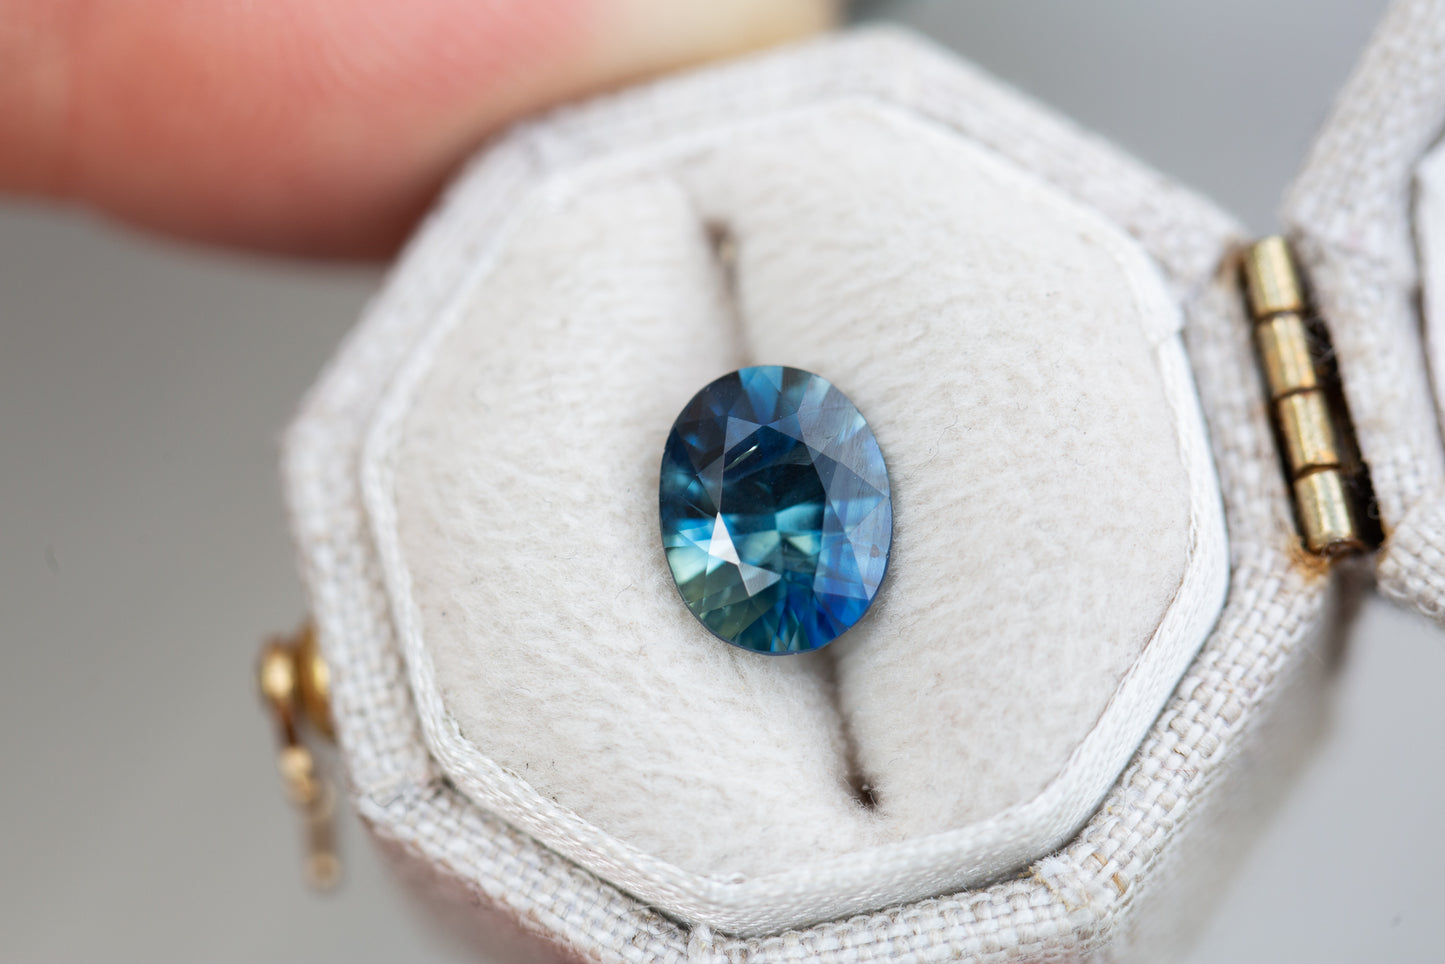 Load image into Gallery viewer, 2.15ct oval blue teal sapphire
